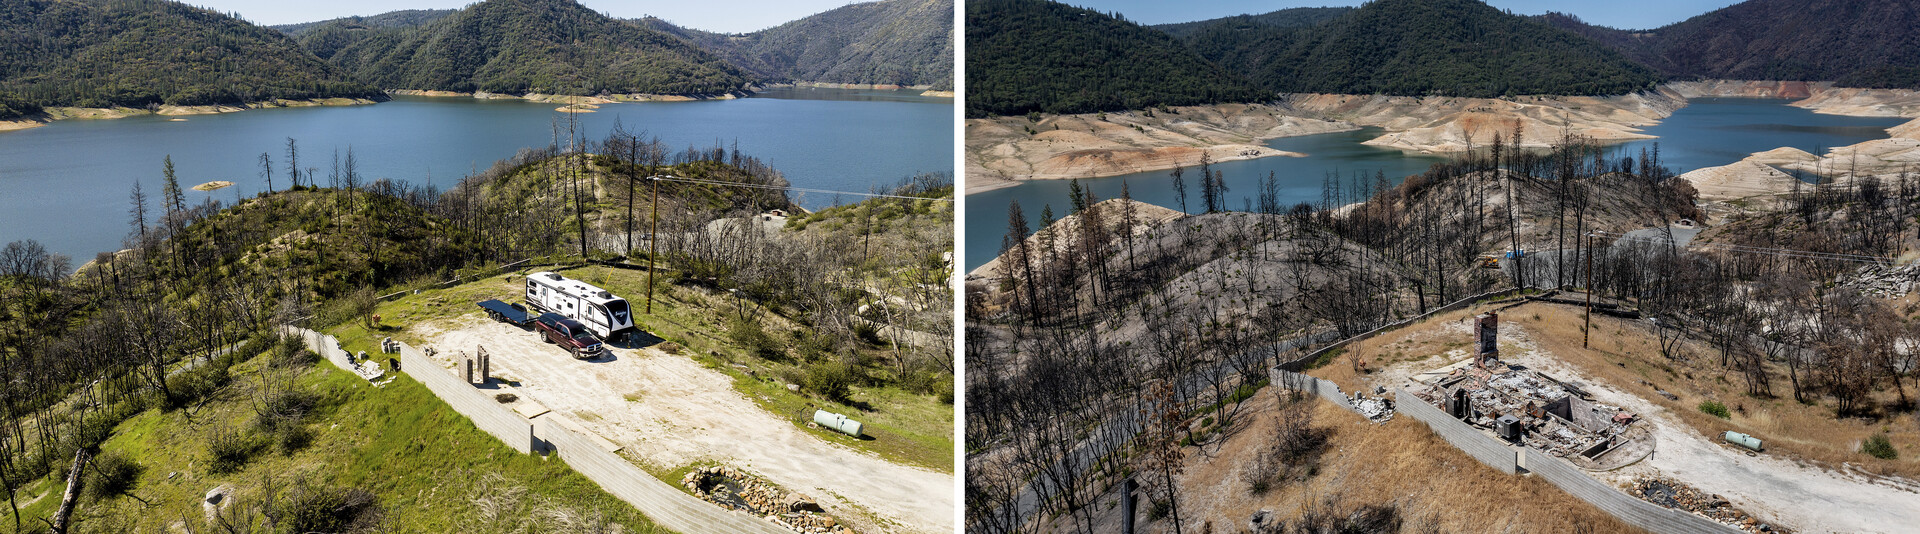 The photo on the left shows a lot of water in Lake Oroville in the background. The photo on the right shows little water in Lake Oroville in the background.